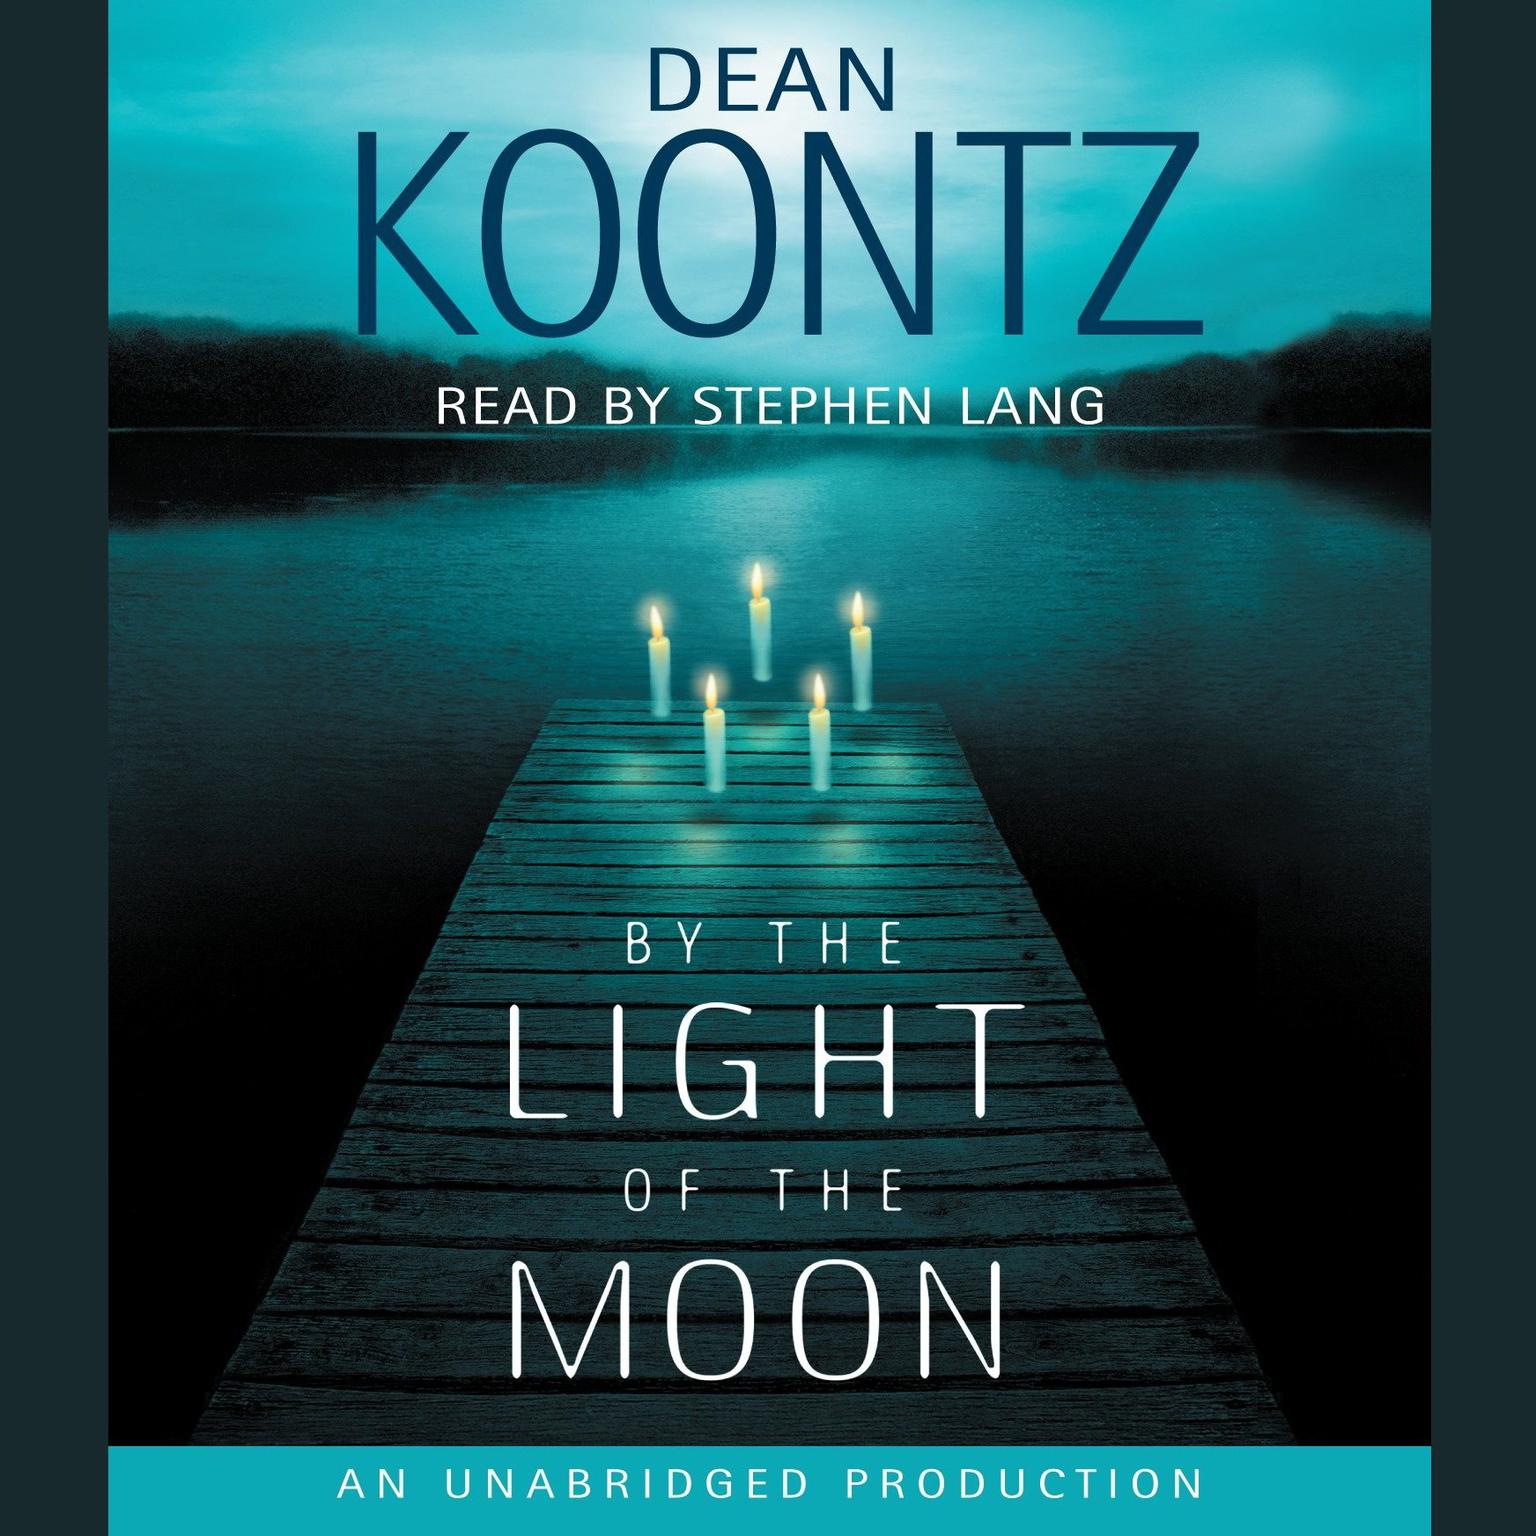 By the Light of the Moon: A Novel Audiobook, by Dean Koontz